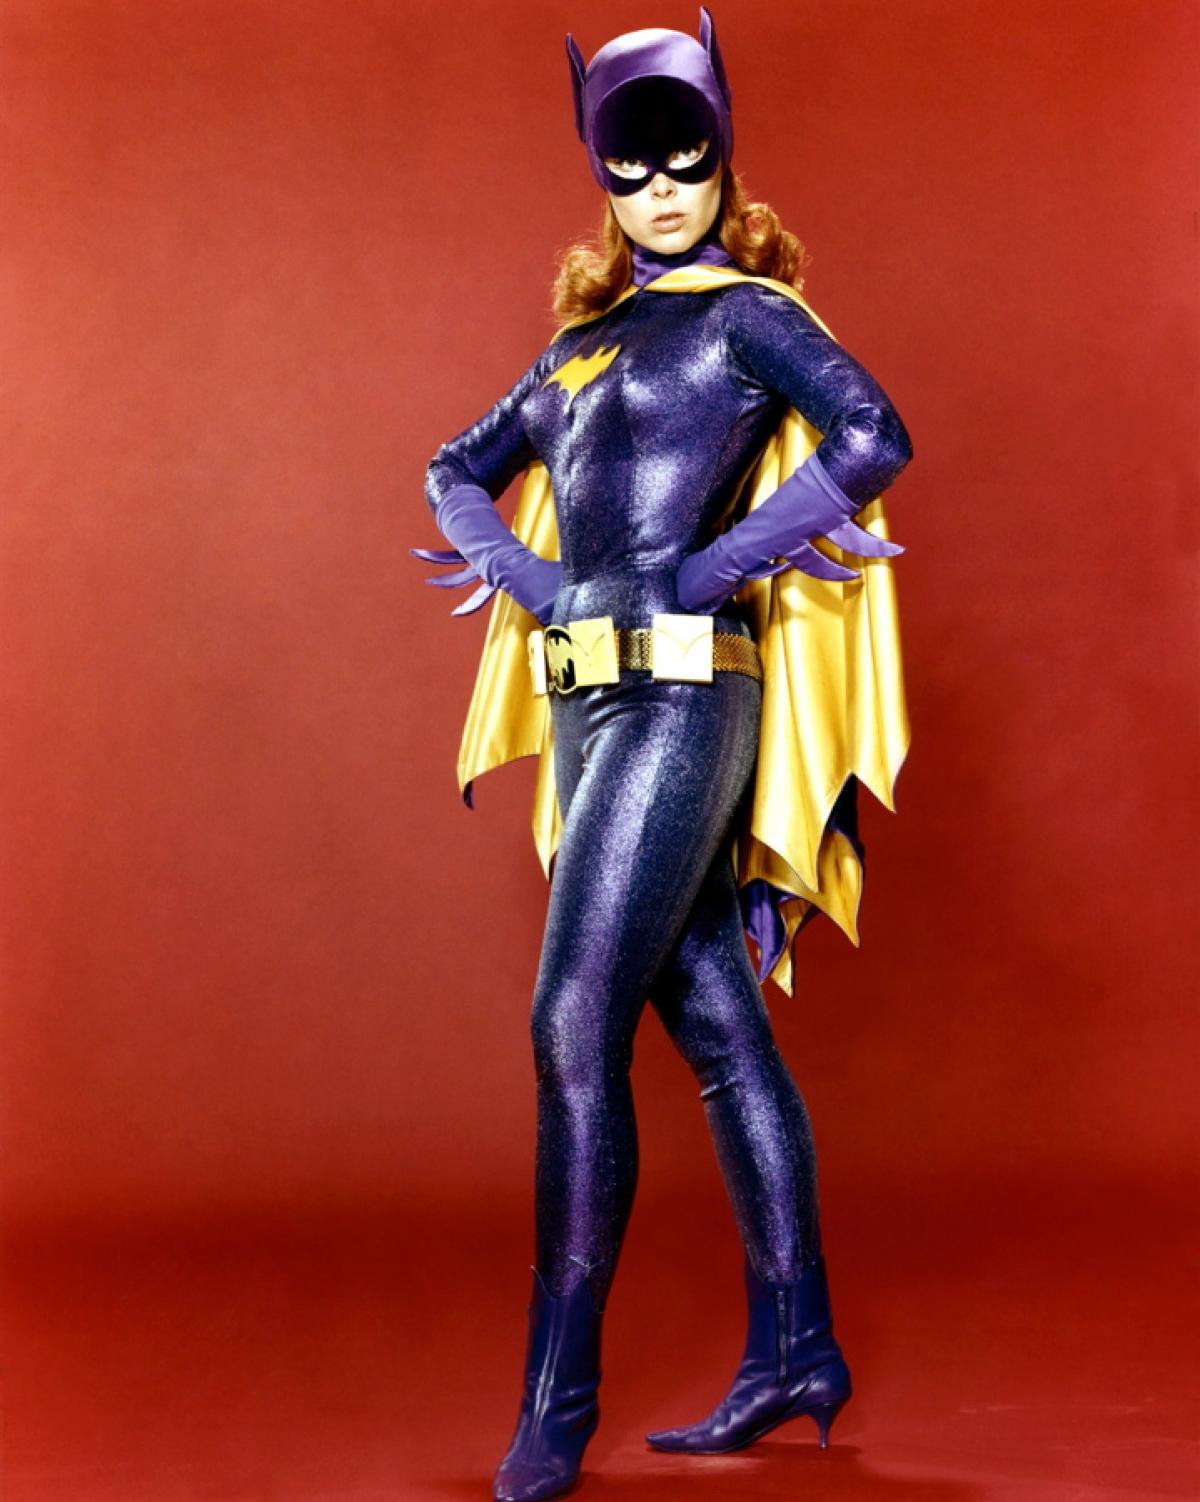 Yvonne Craig, (born May 16, 1937) is an American actress be…